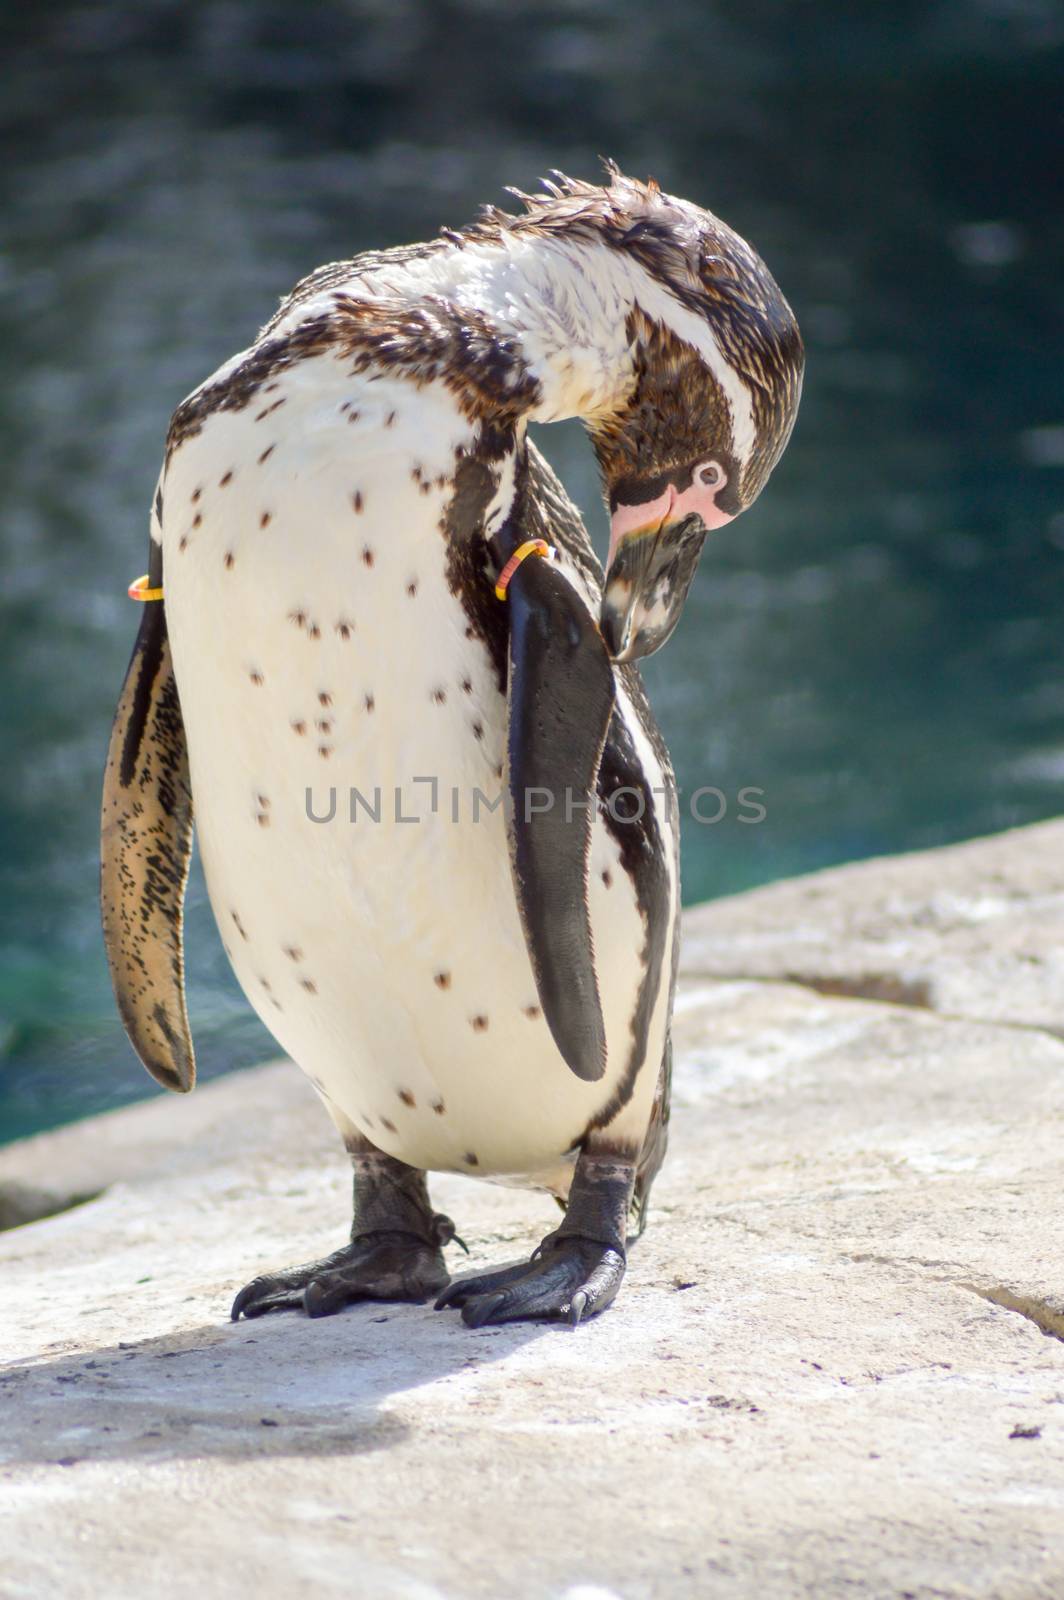 Humboldt Penguin Grooming in an Animal Park in France